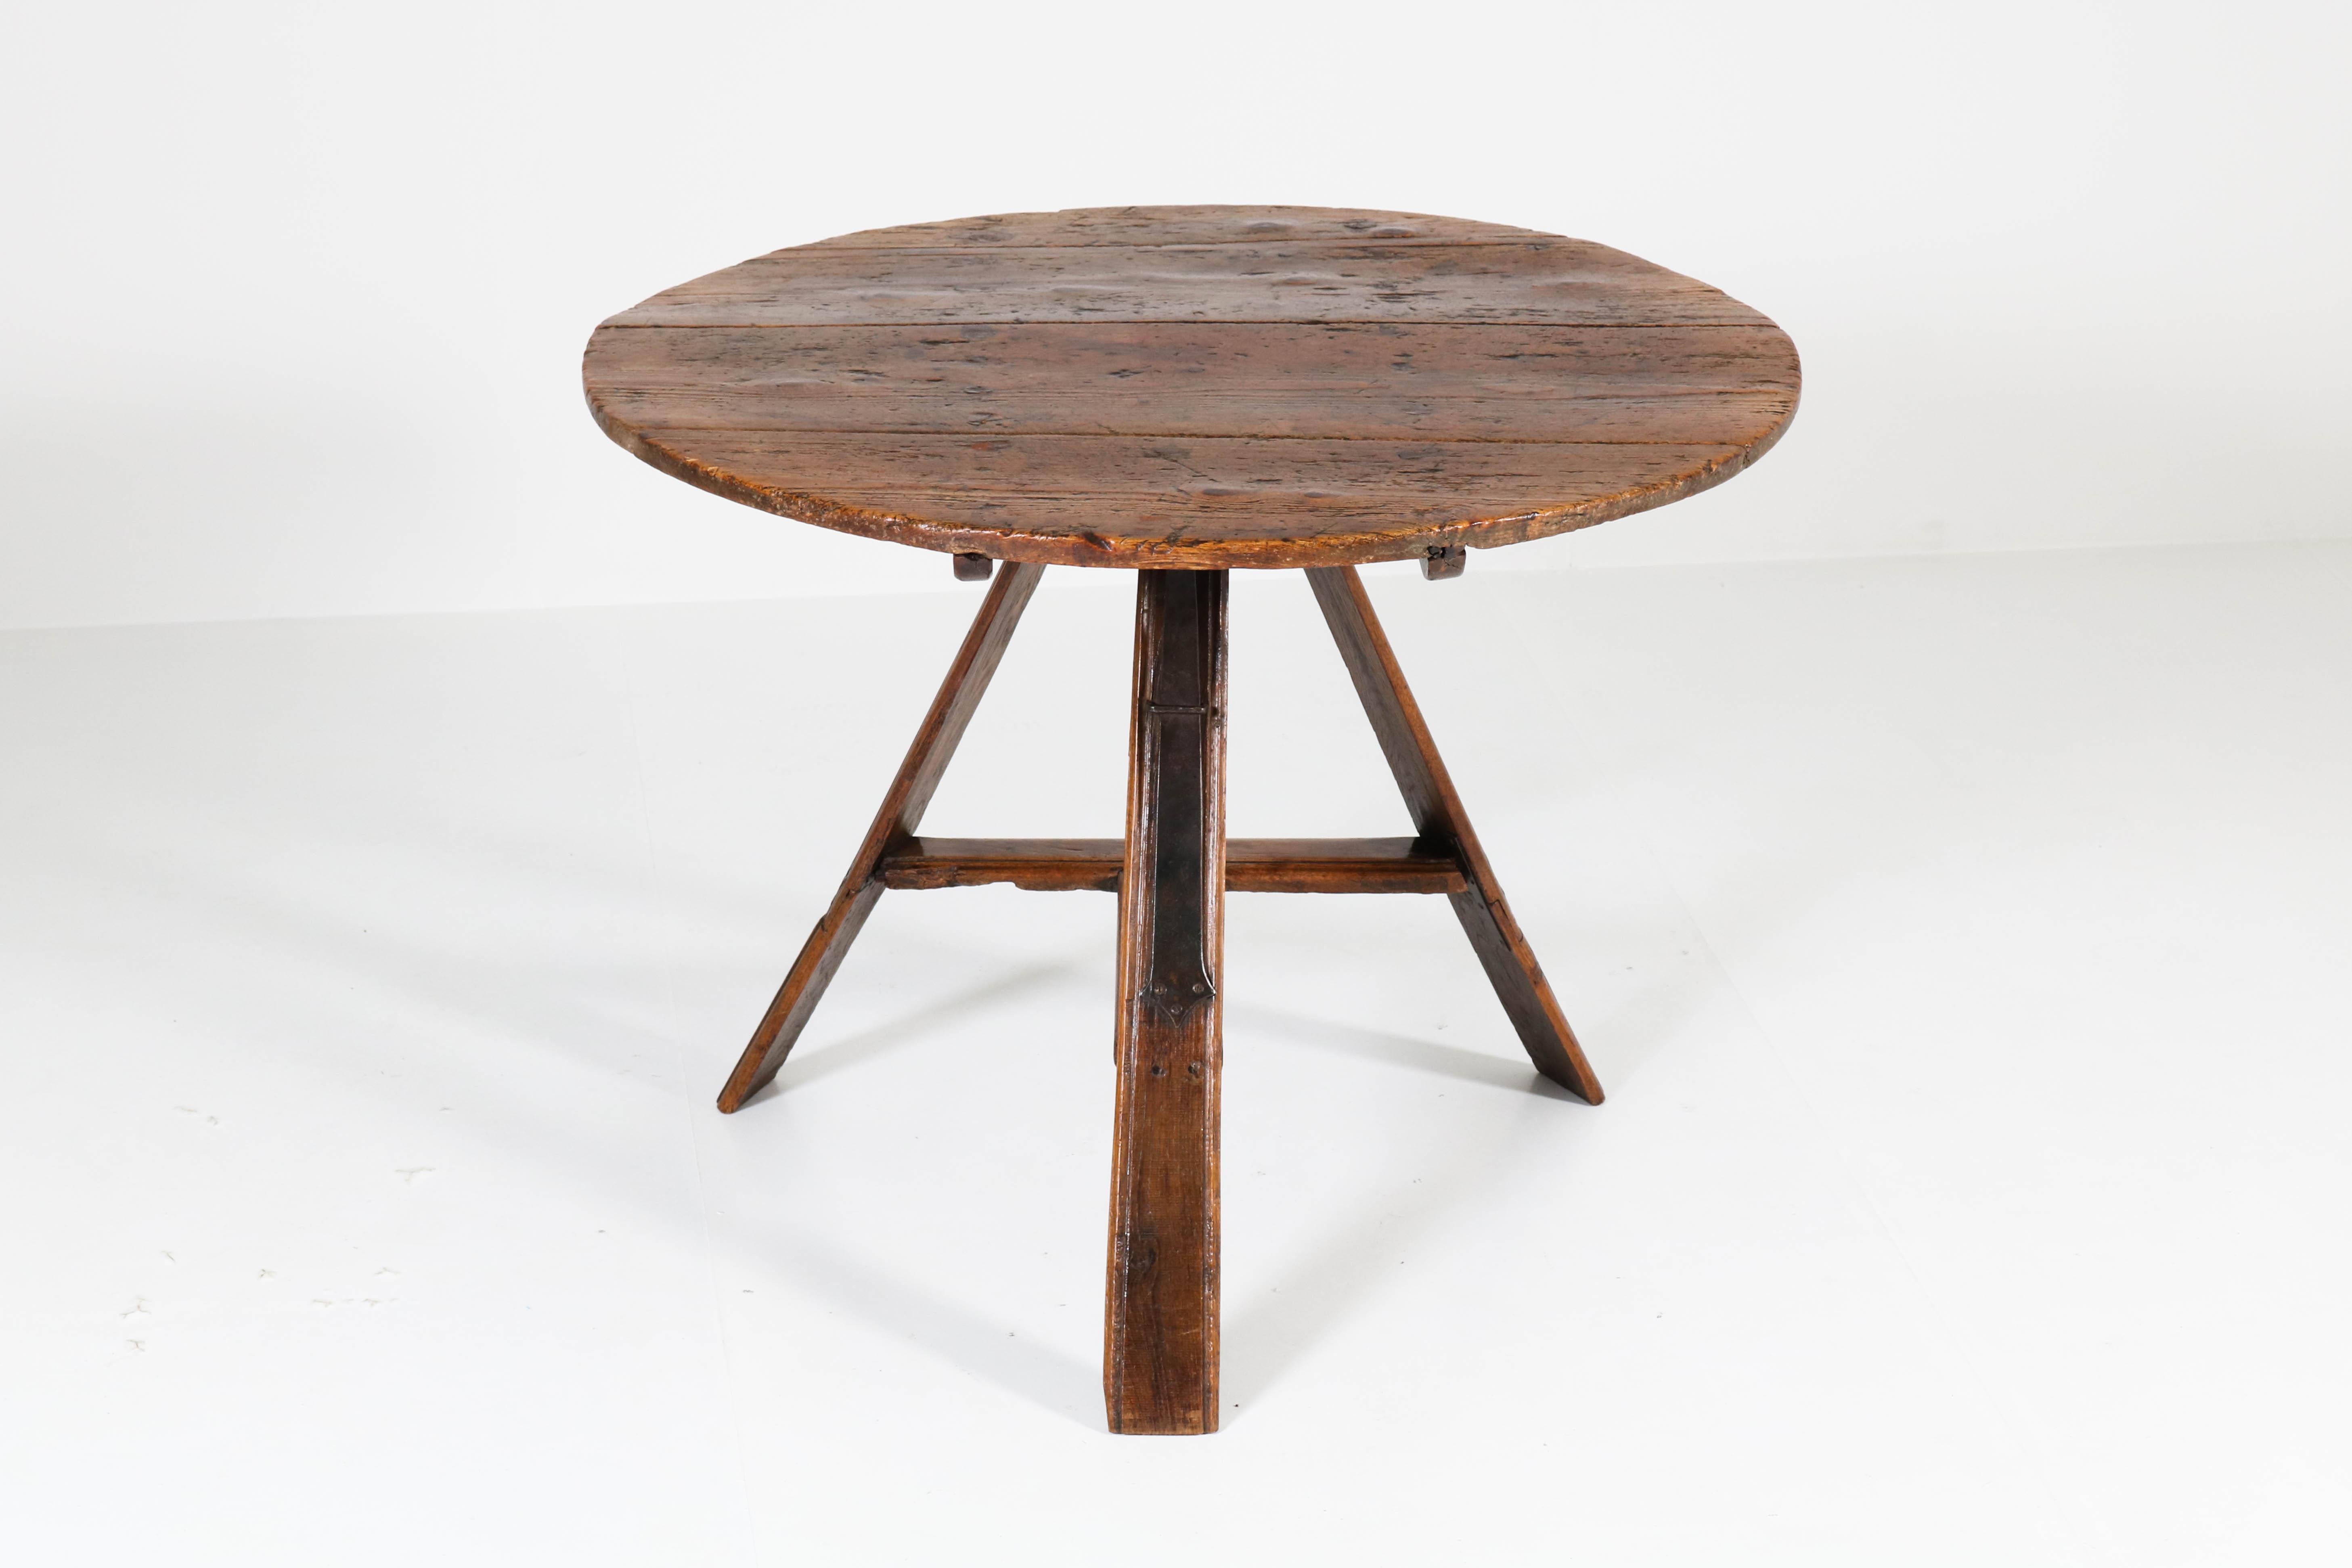 Wonderful 18th century Dutch Provincial tilt-top table.
Original solid oak top with the original base.
Typical Dutch so called Flap aan de Wand table.
Two of the three legs have old restorations, see image 7.
In good condition with minor wear